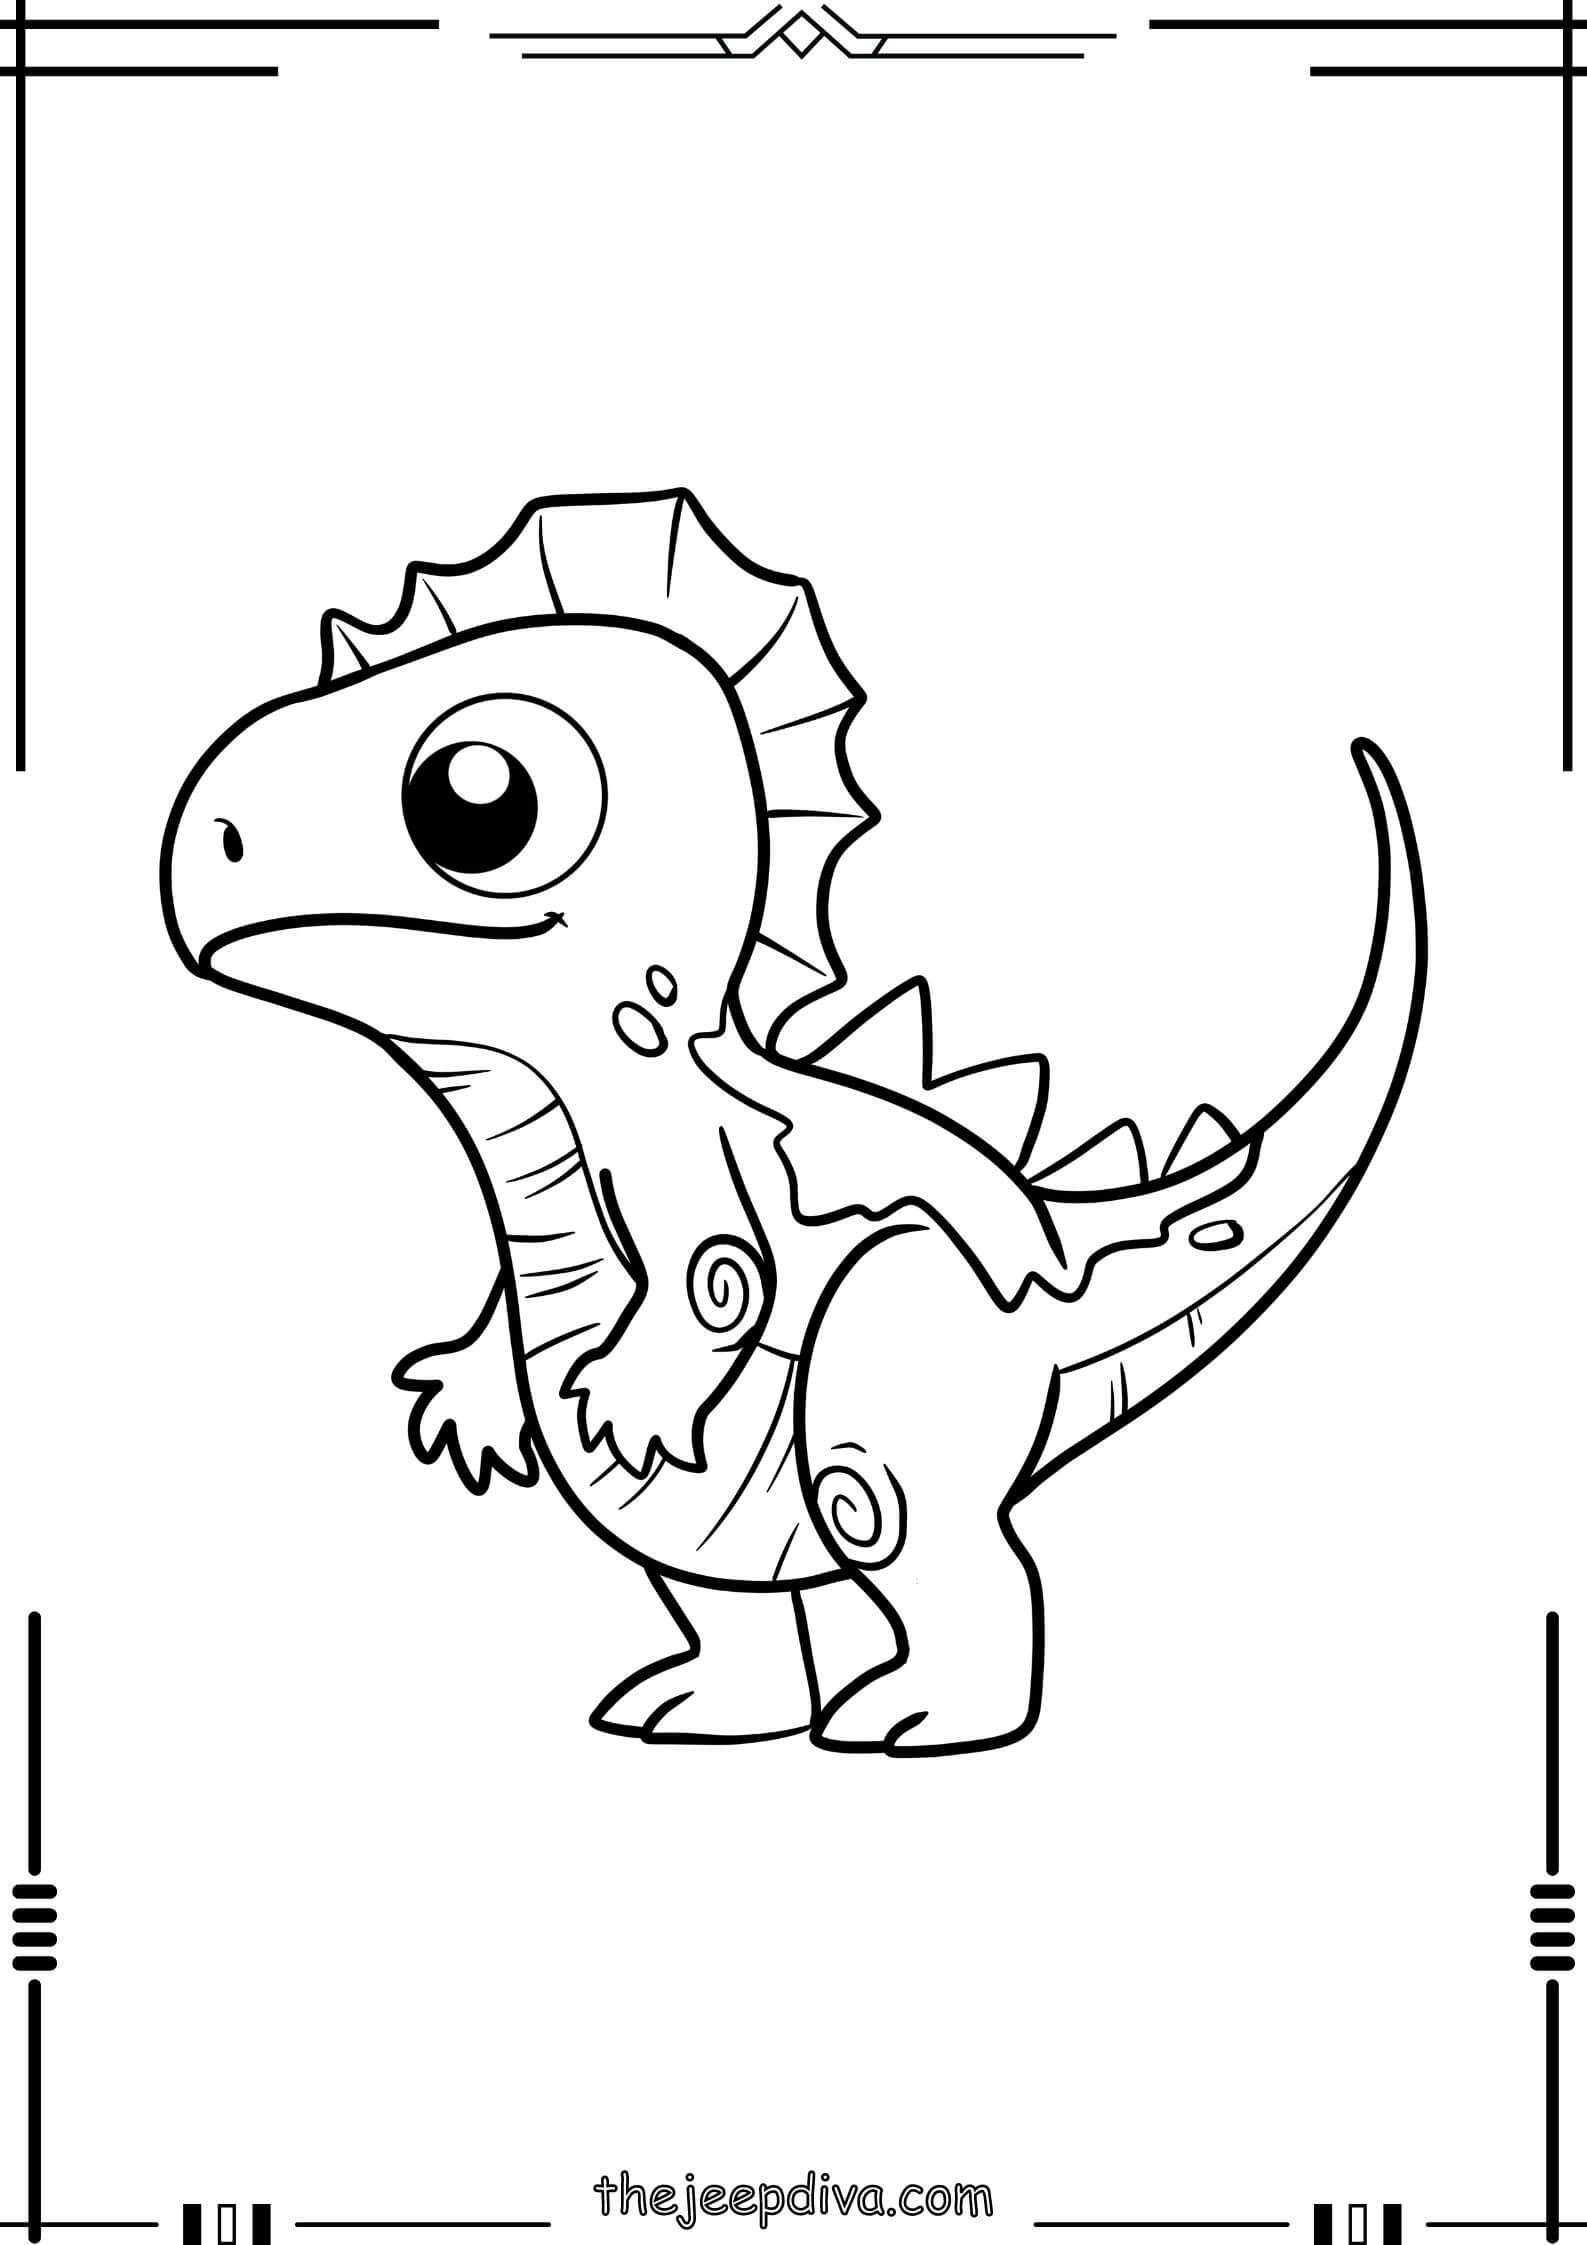 Dinosaur-Colouring-Pages-Easy-10